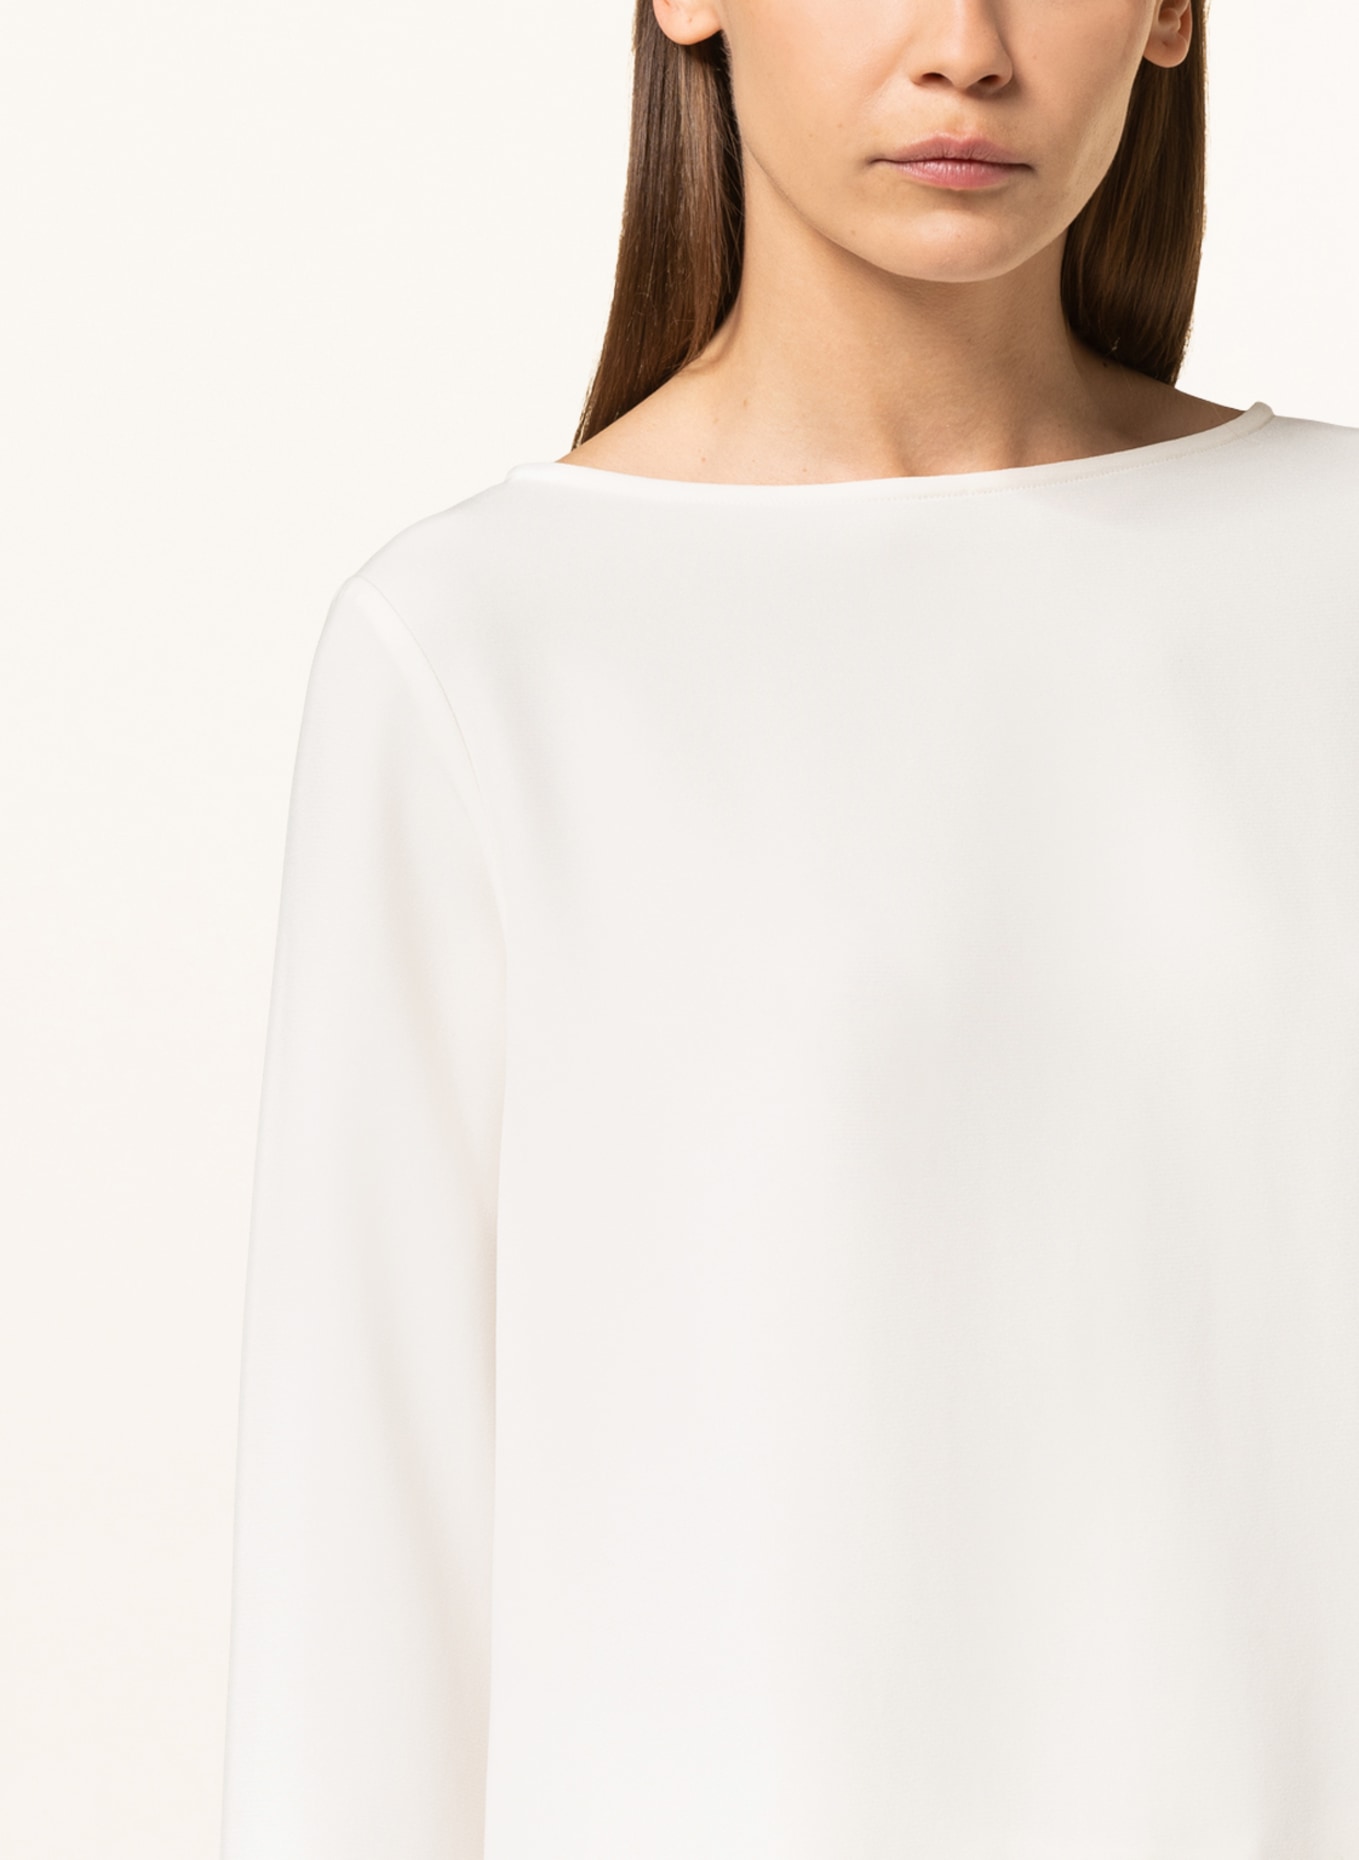 ANTONELLI firenze Shirt blouse with 3/4 sleeves, Color: WHITE (Image 4)